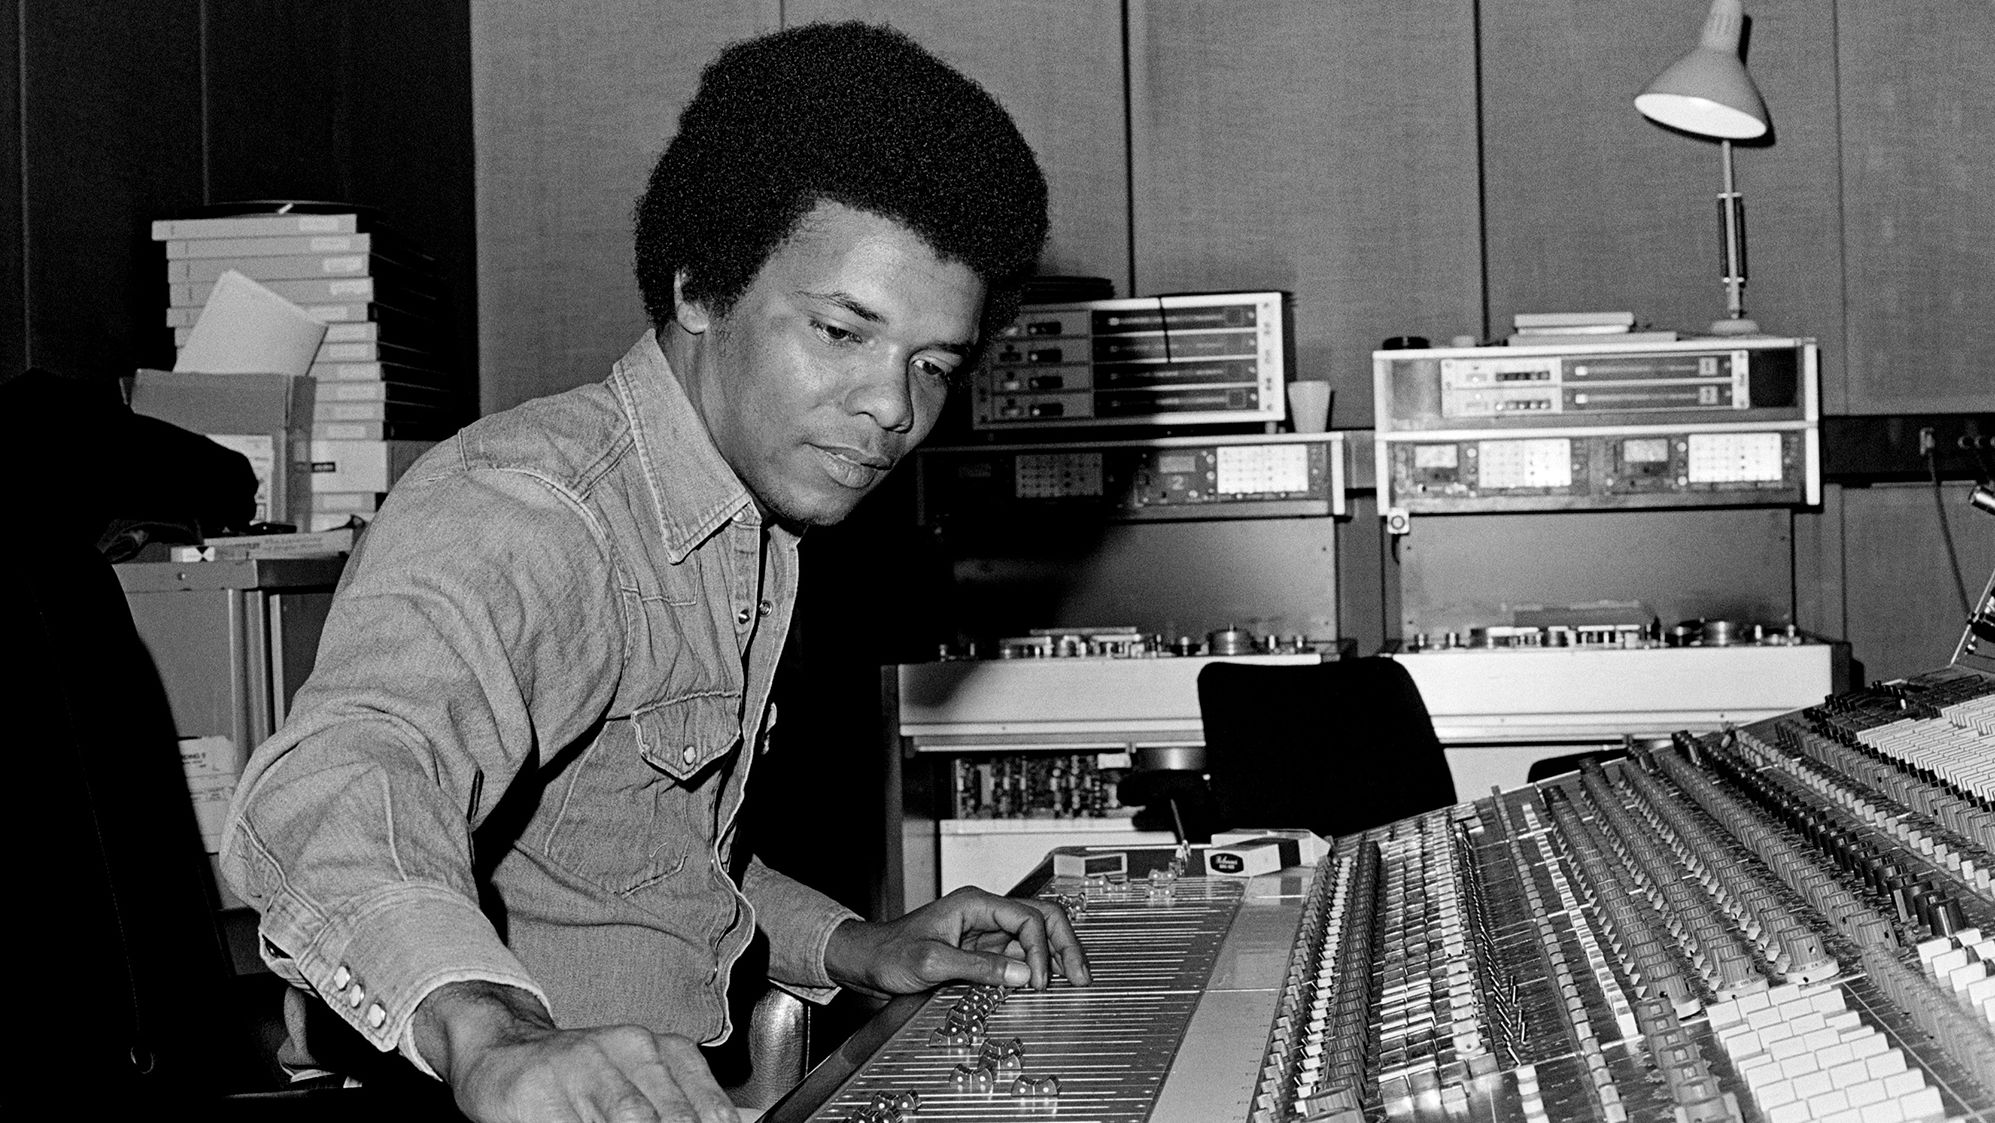 Johnny Nash in a 1975 photo taken at Whitfield Street Studios in London.